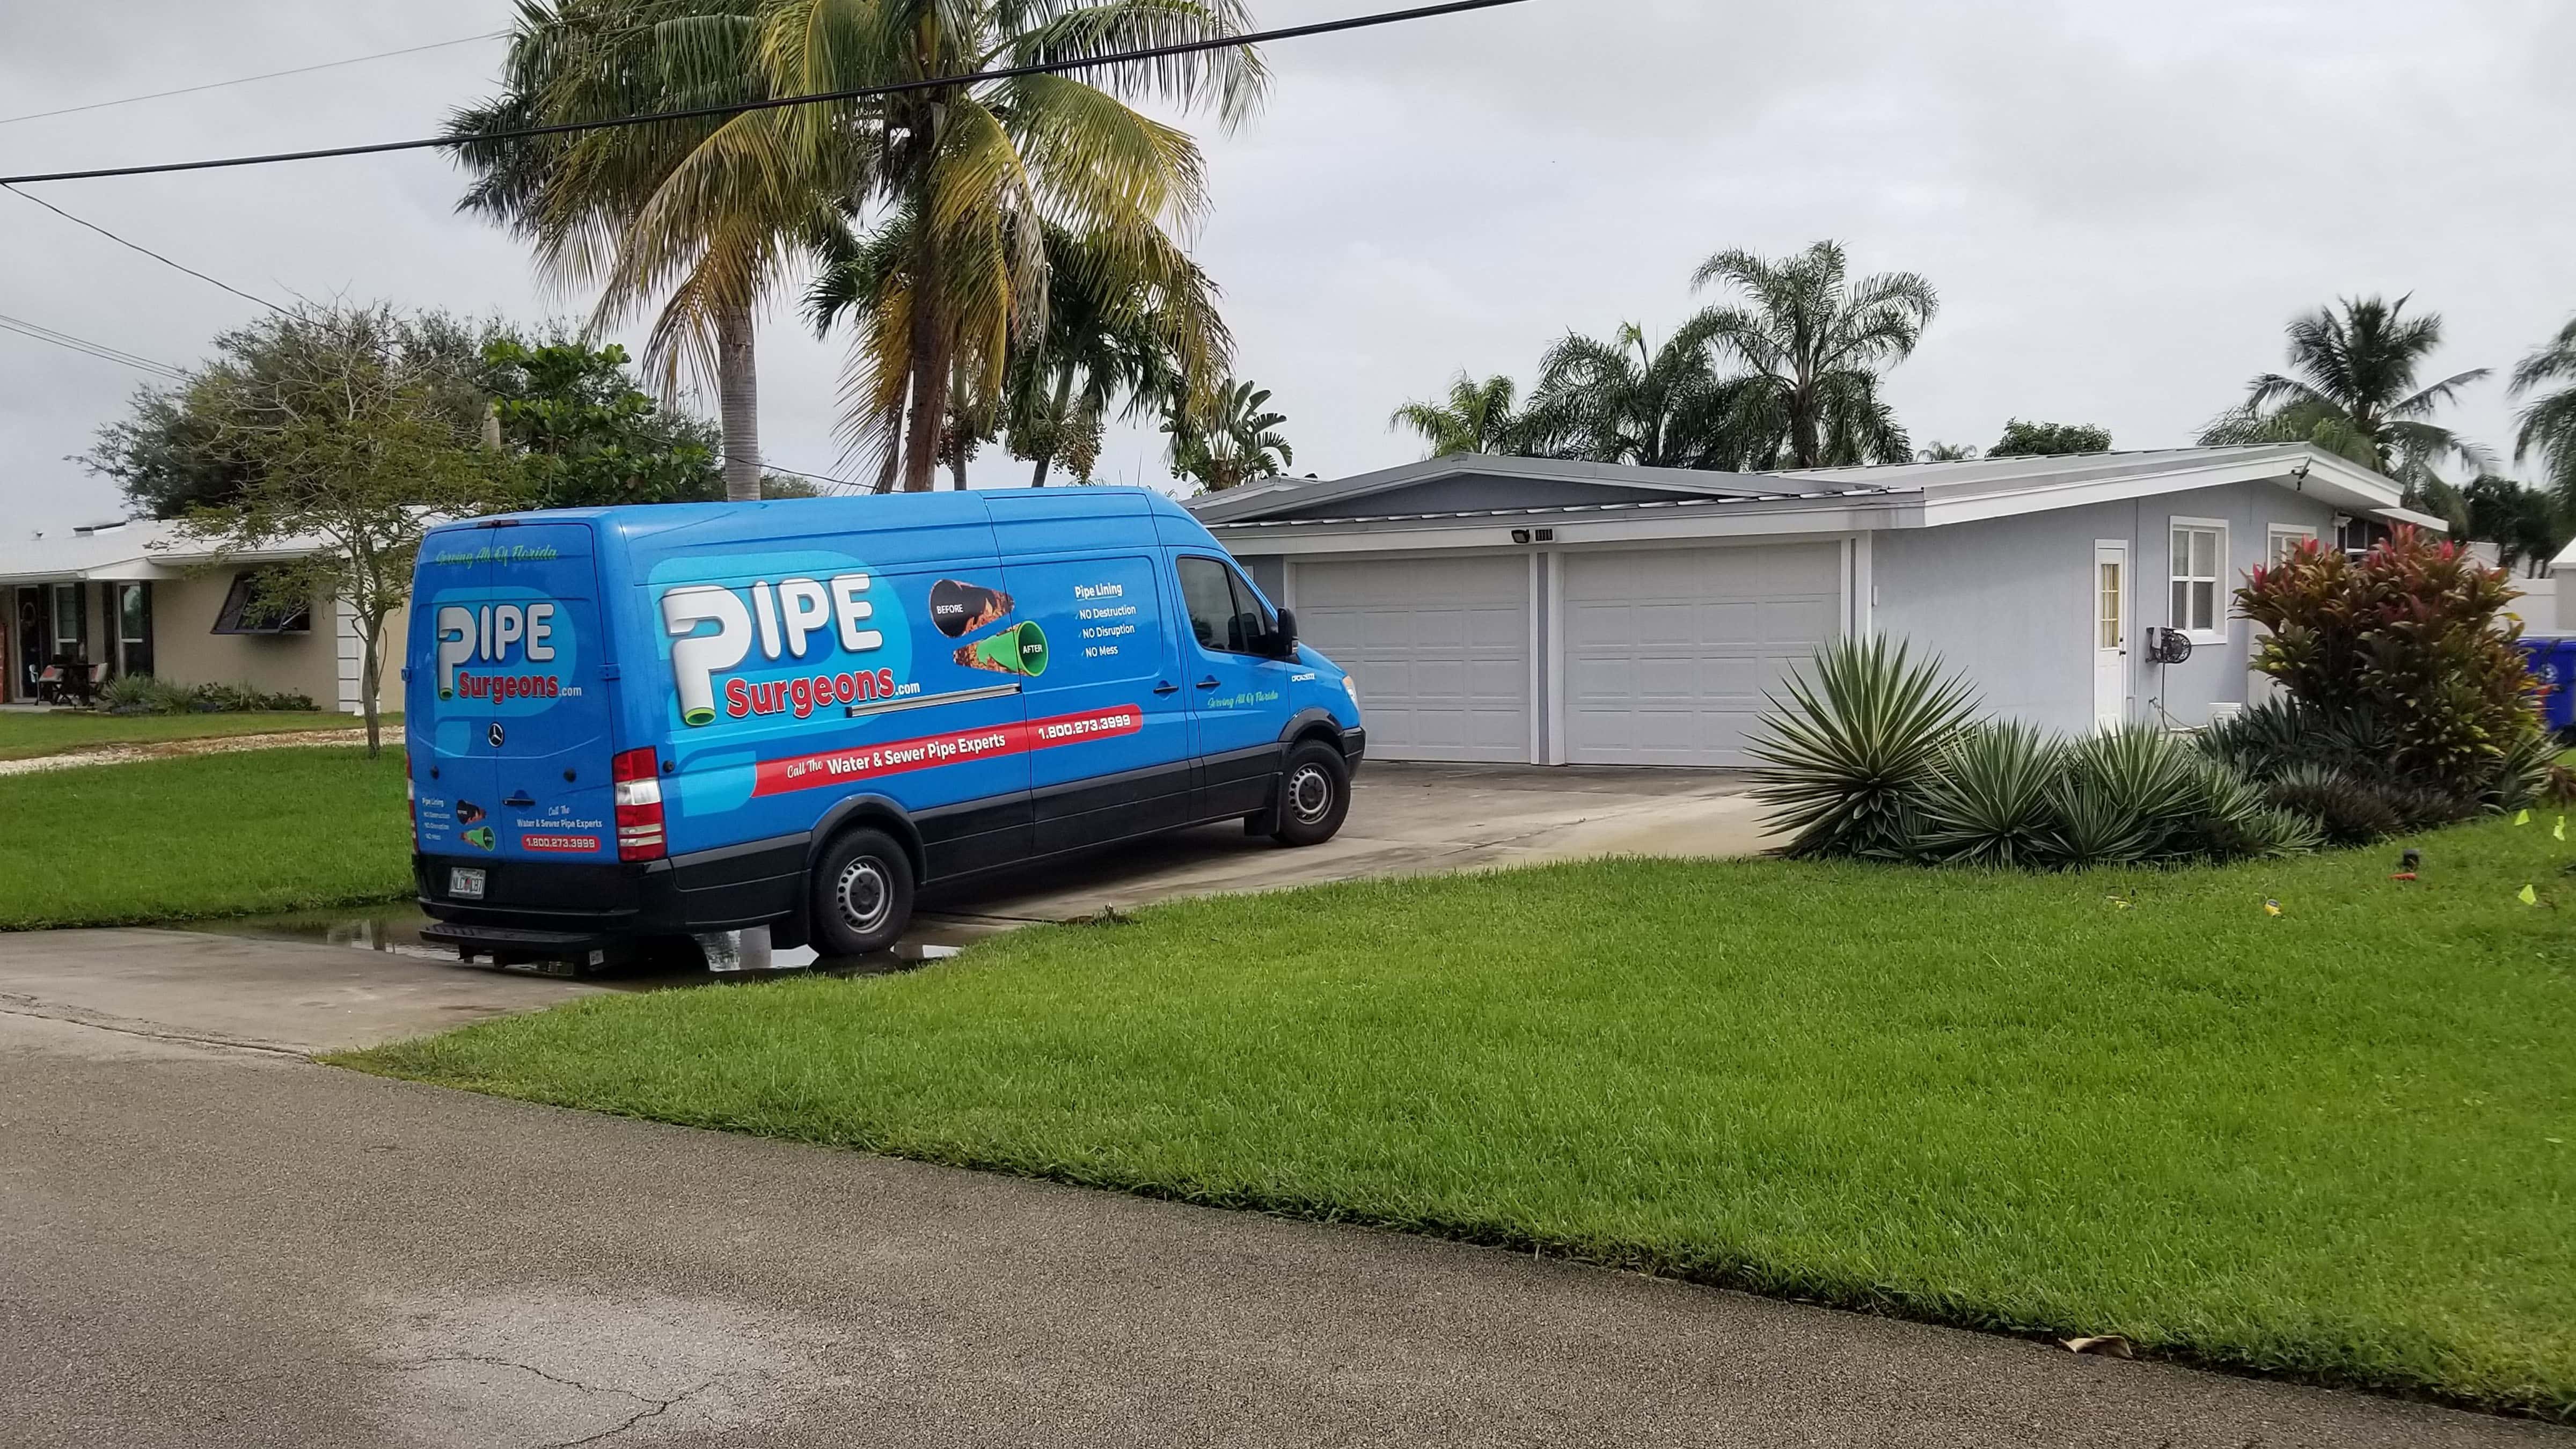 Pipe Surgeons - Port St. Lucie, FL, US, plumbing and heating near me